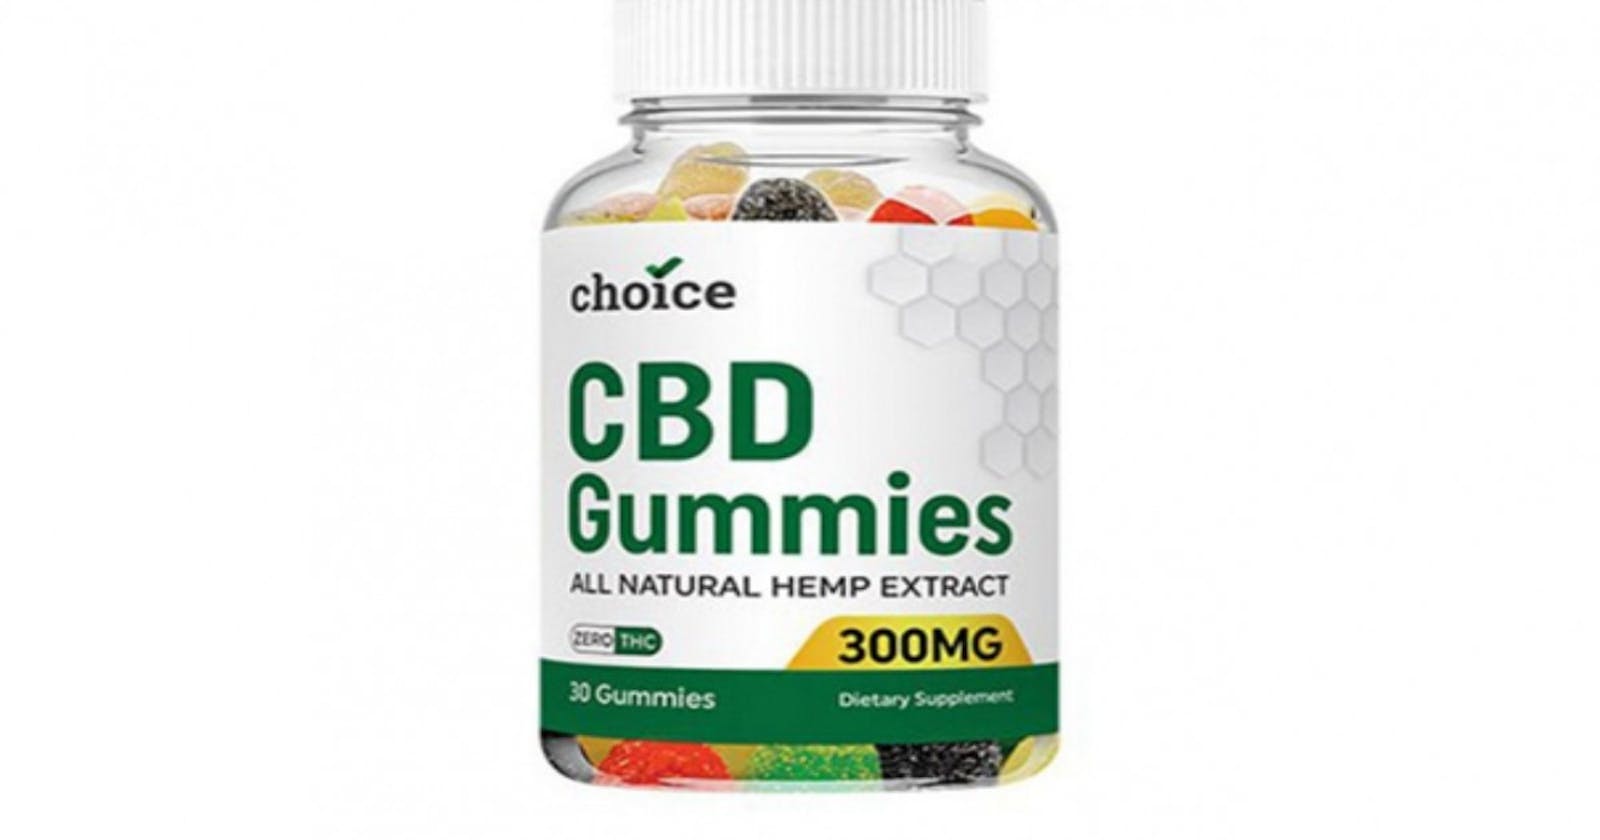 Choice CBD Gummies REVIEWS [Scam OR Legit] Shocking Side Effects Exposed?